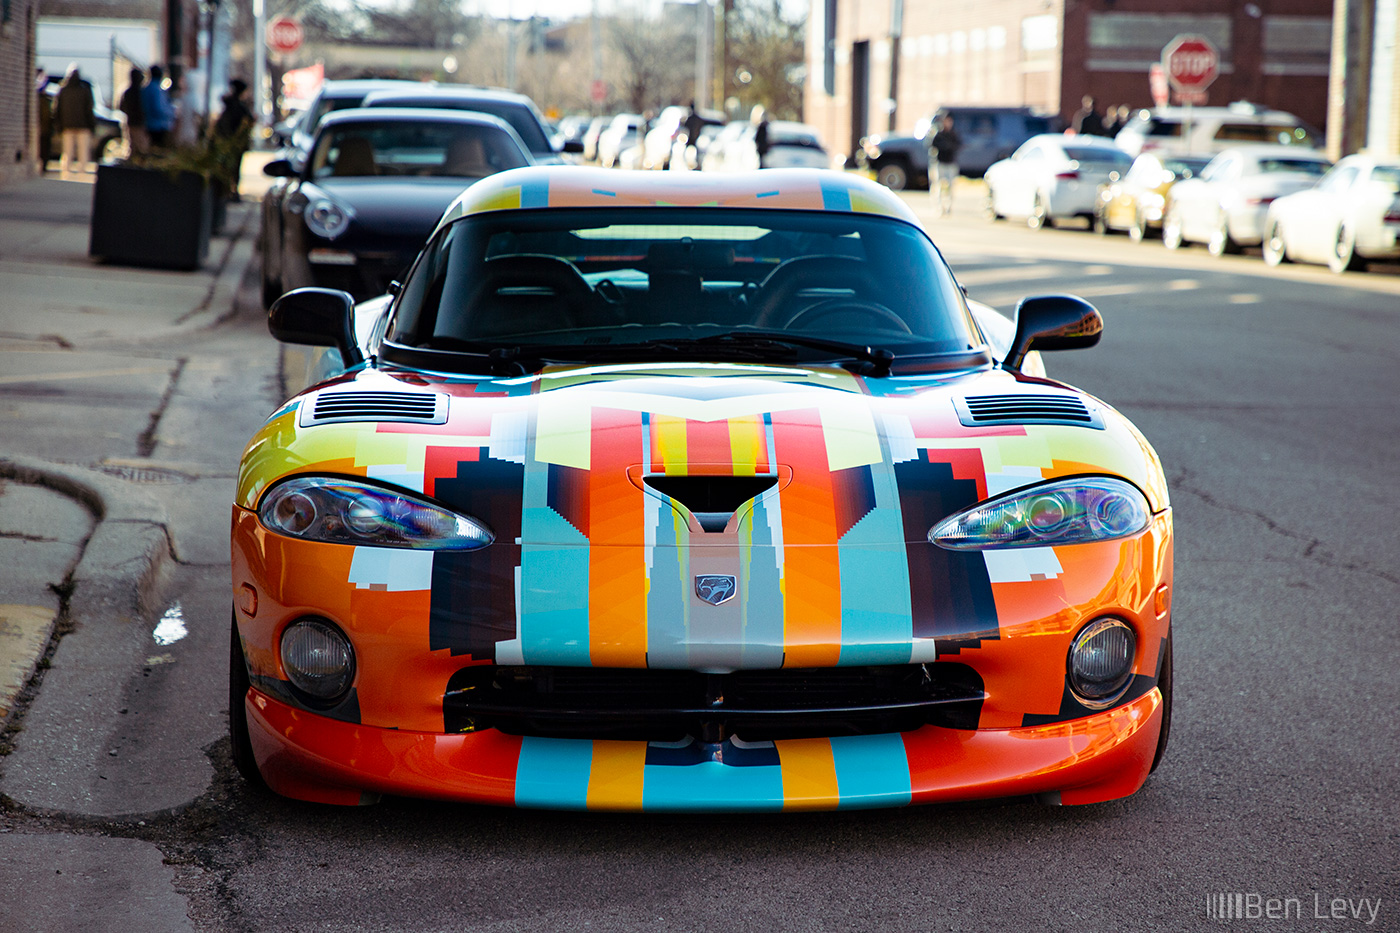 Wild Wrap on Dodge Viper GTS Designed by NoPattern